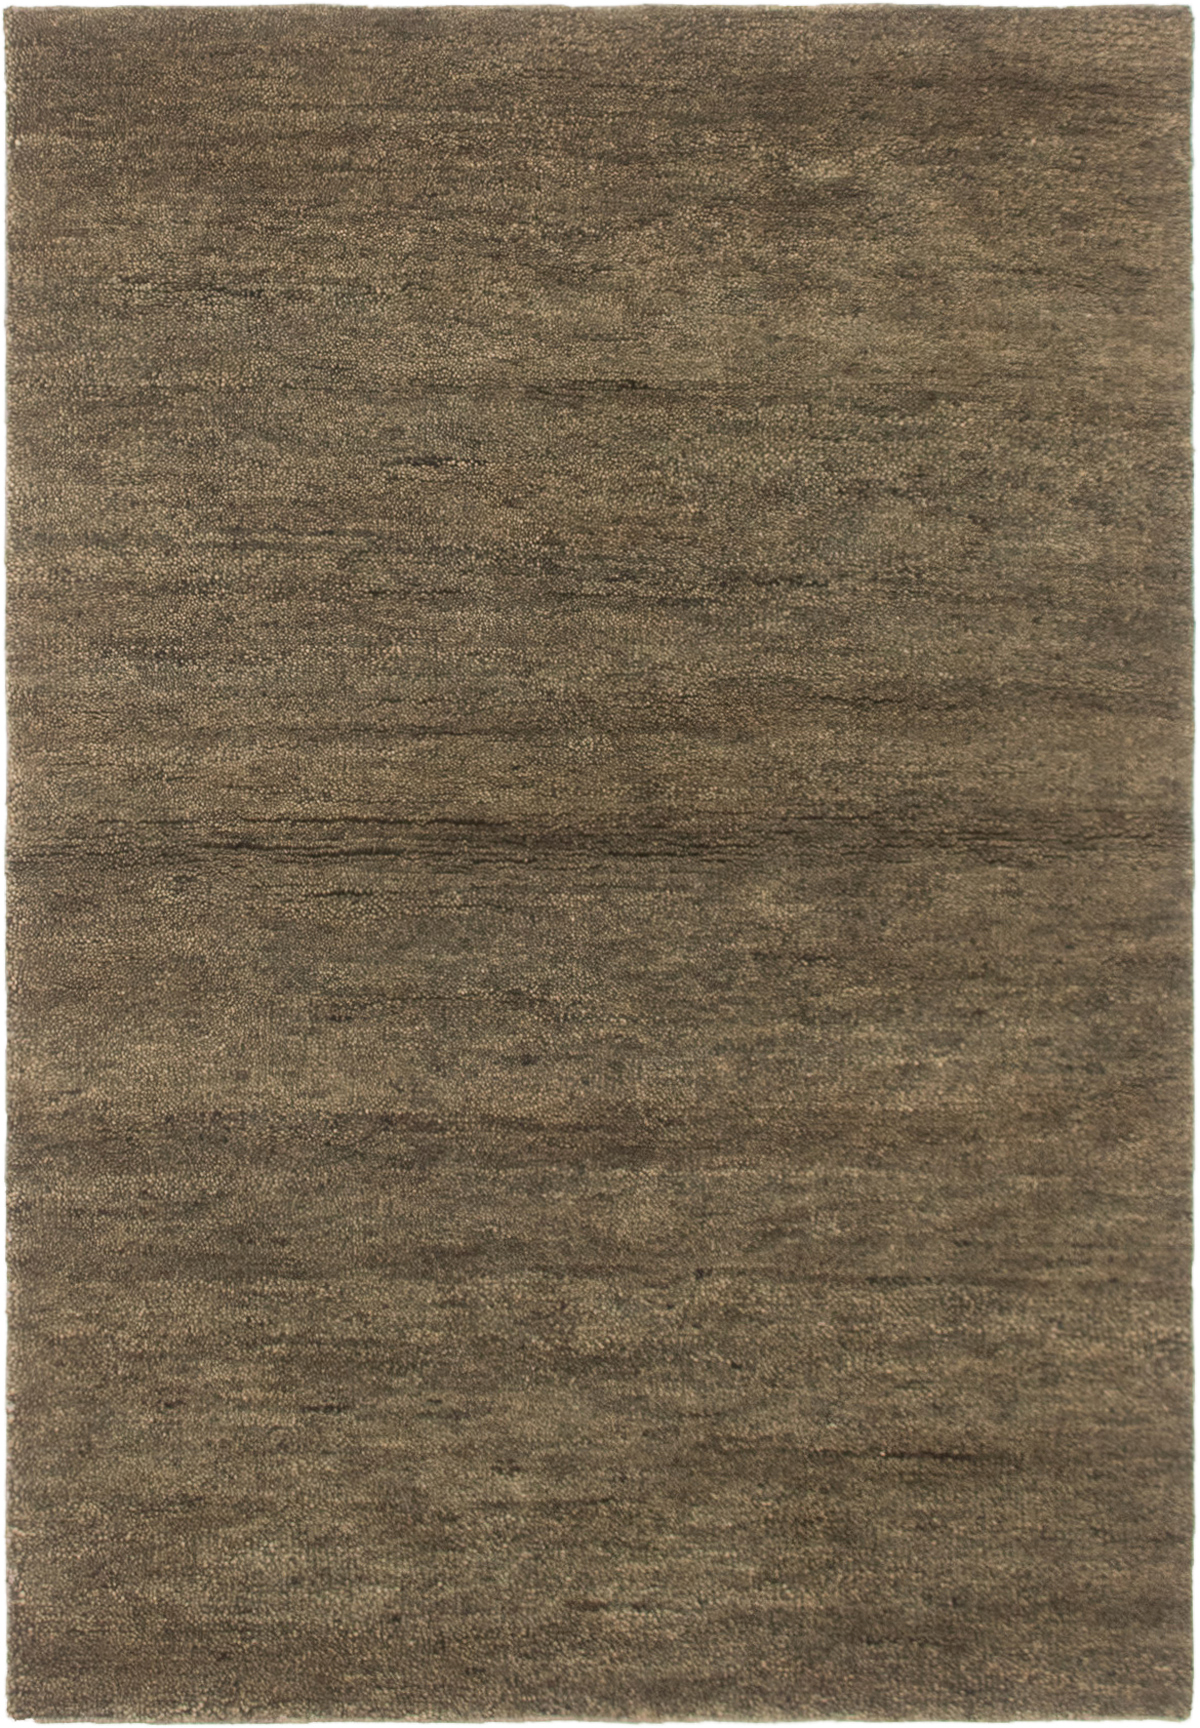 Hand-knotted Tangier Dark Green Wool Rug 4'9" x 6'10" Size: 4'9" x 6'10"  